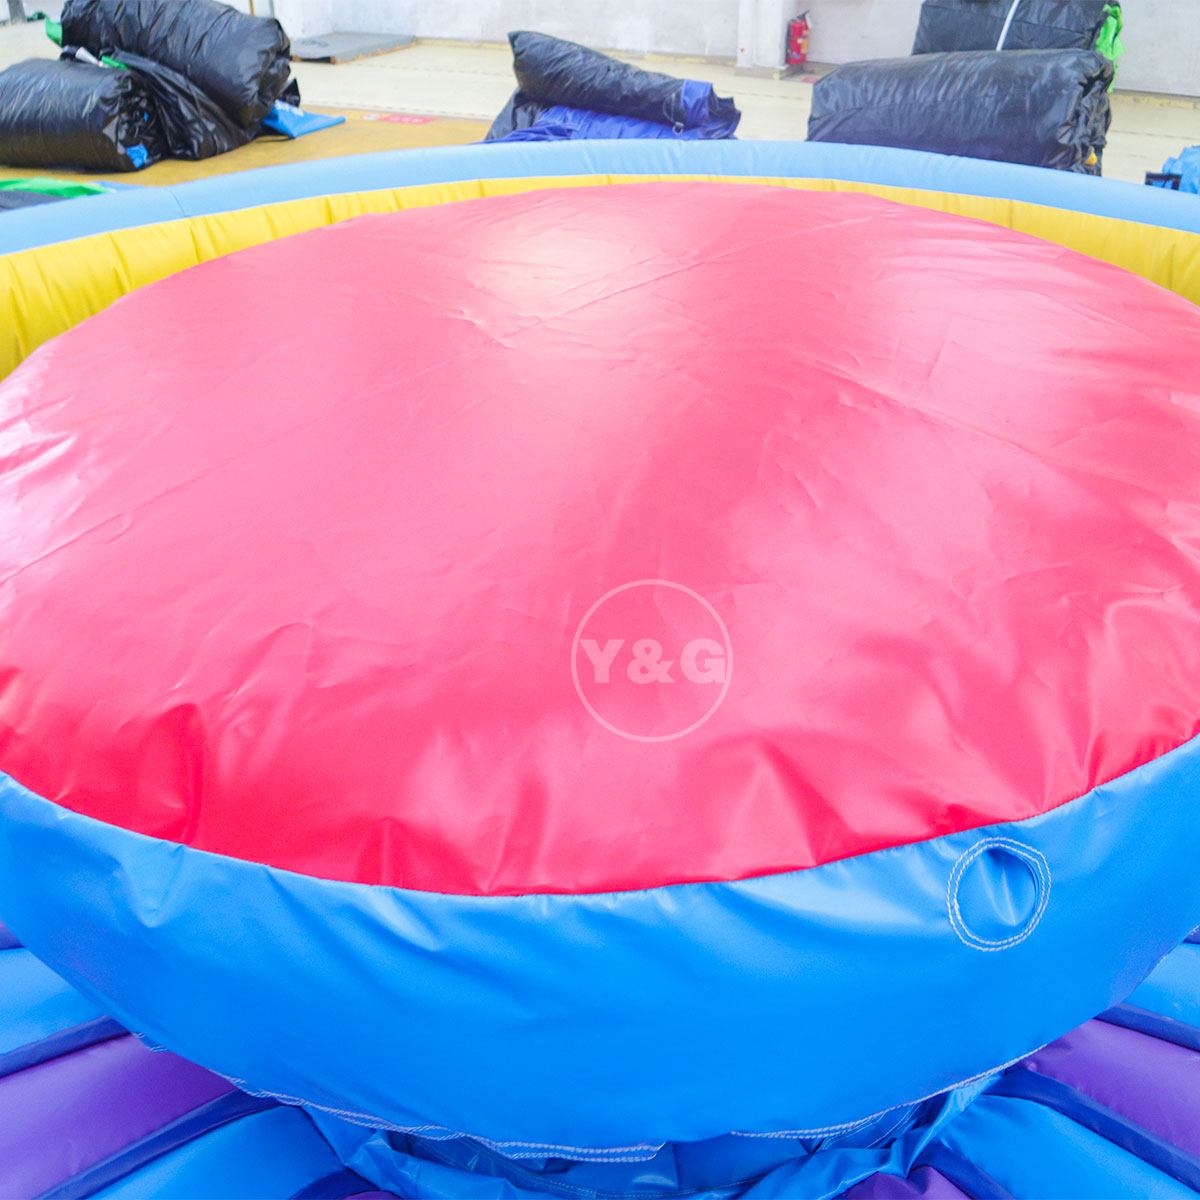 Outdoor inflatable sports areaGH082